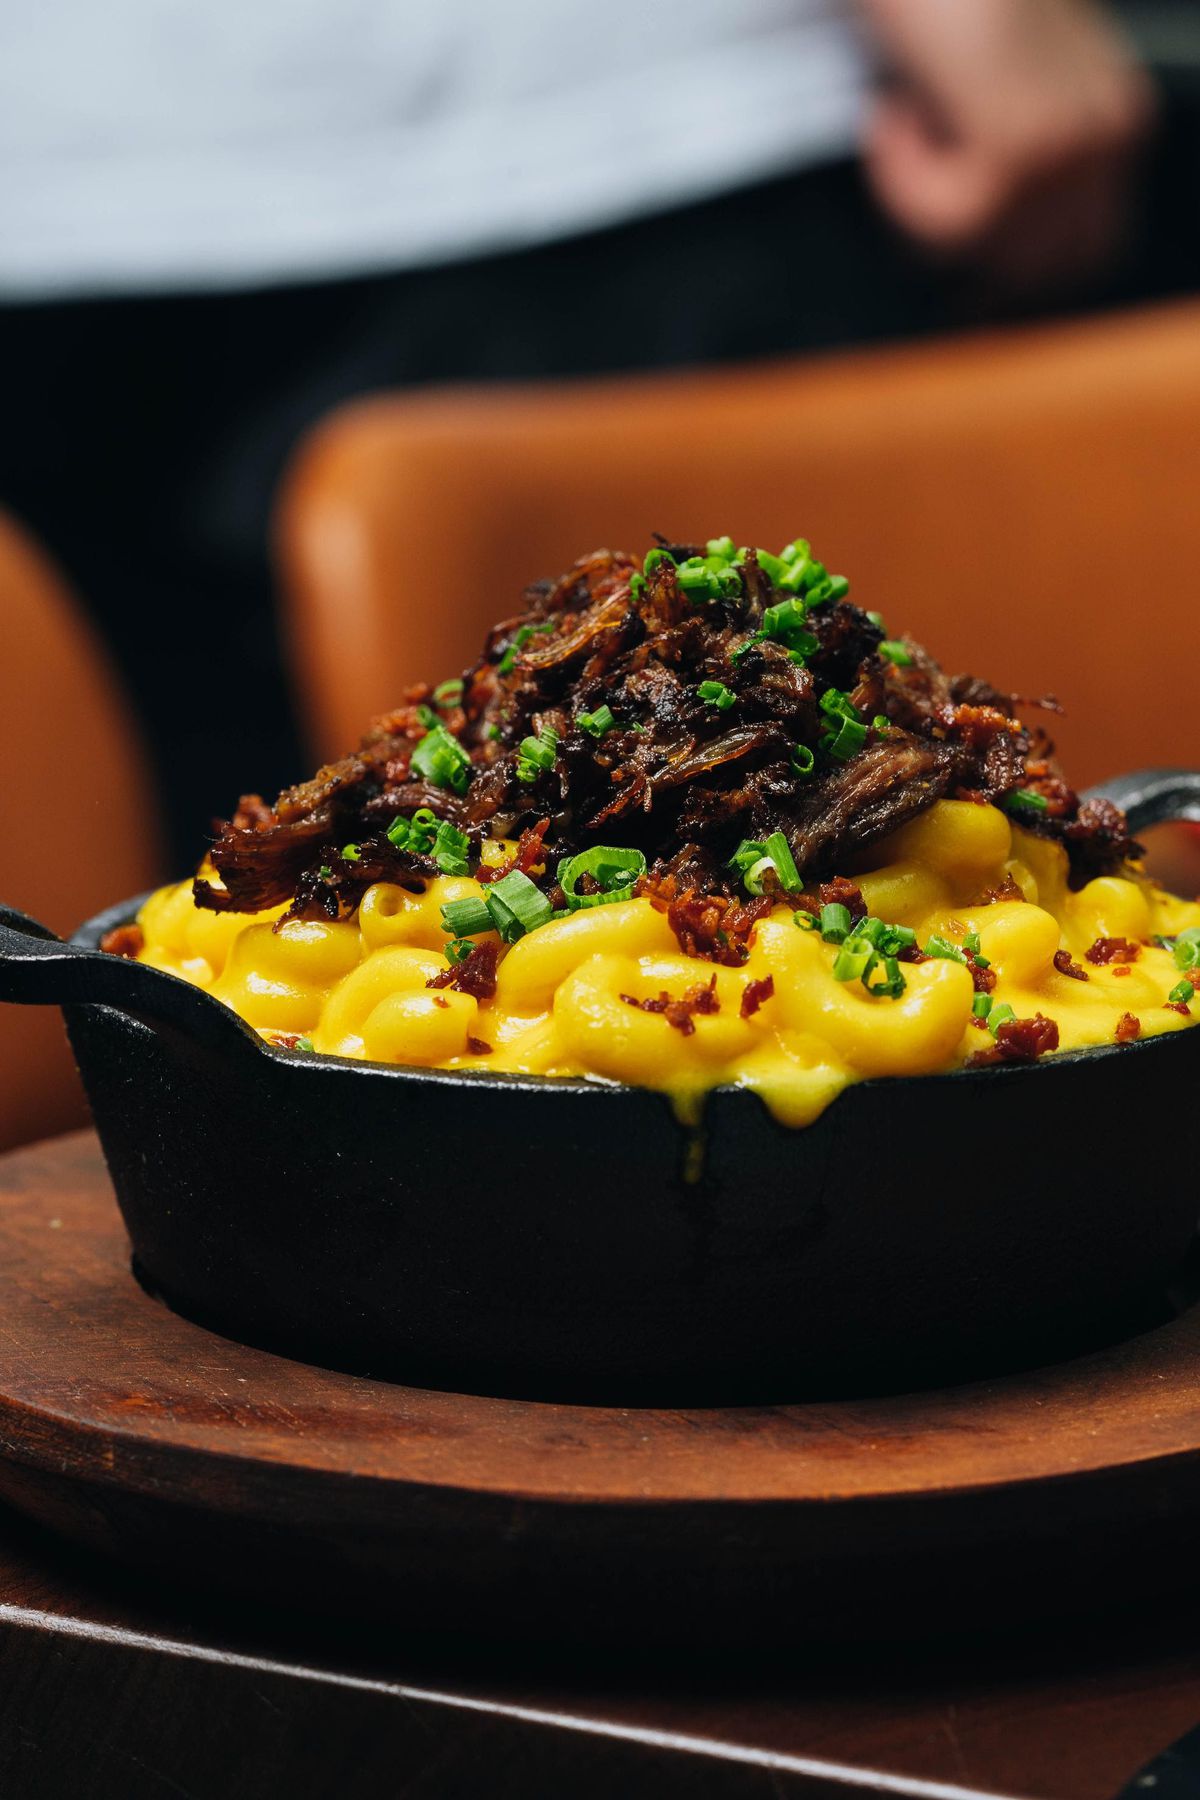 Mac n’ cheese topped with shortrib, bacon, and chives on a brown plate.